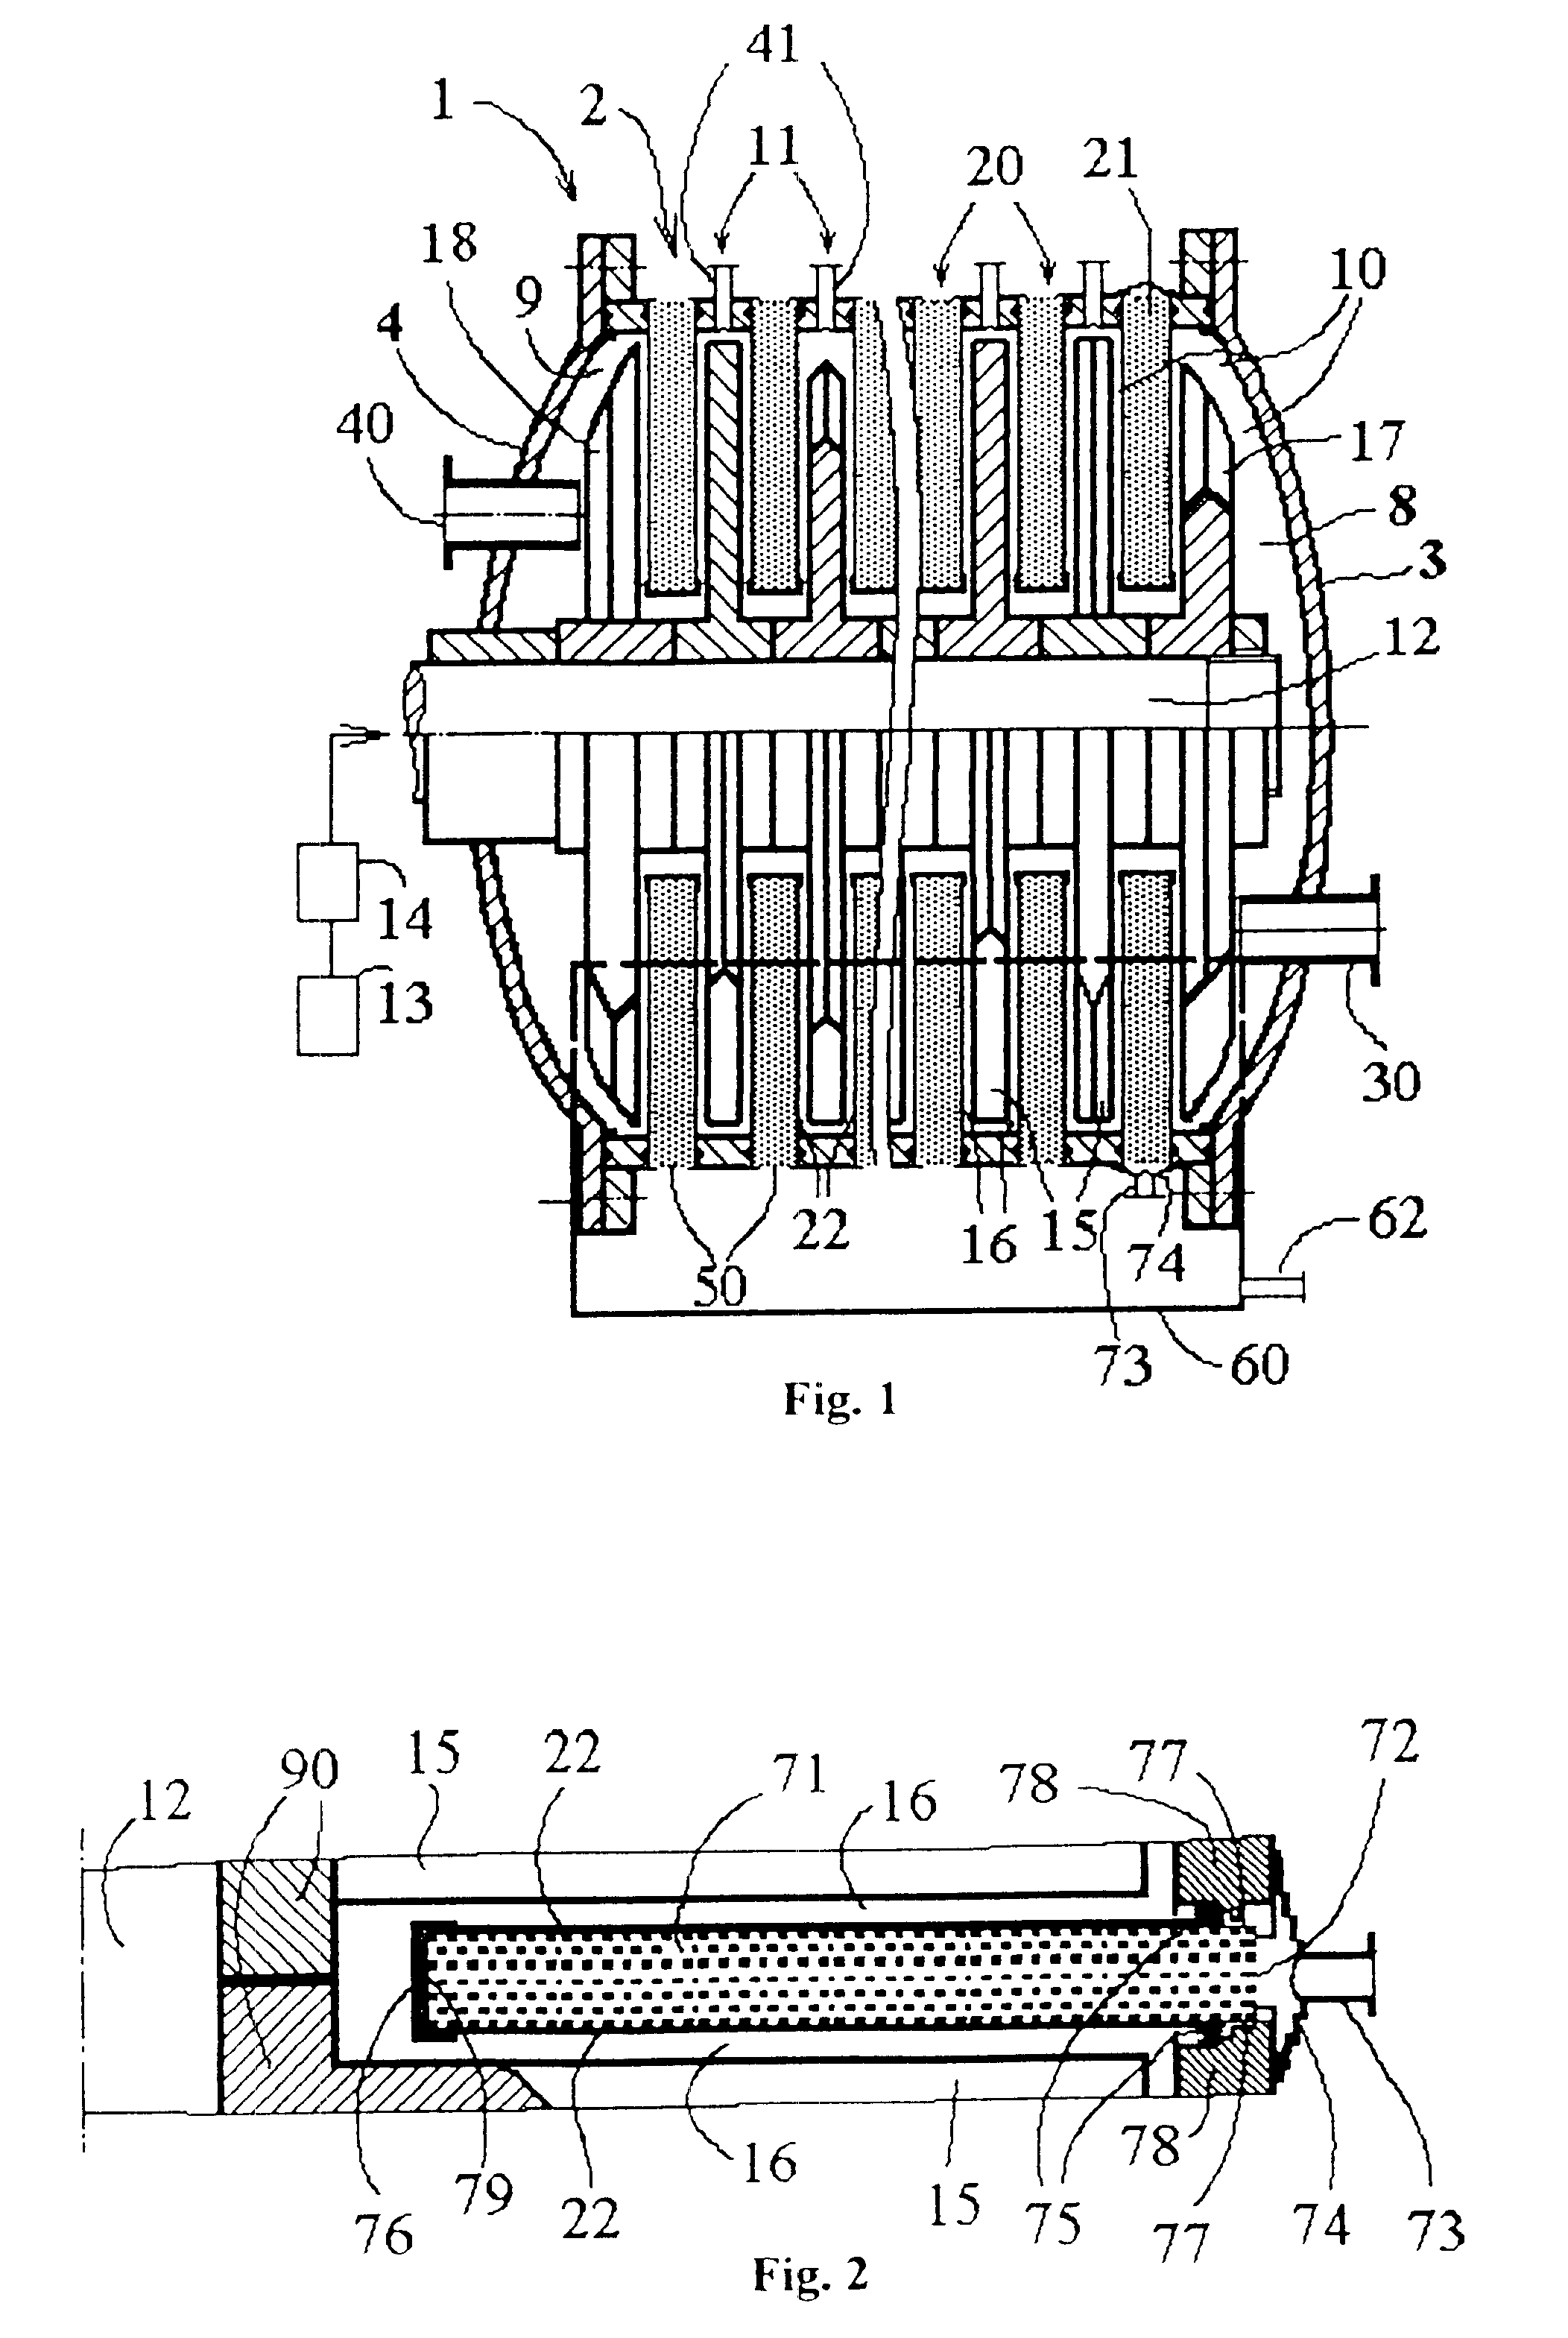 Apparatus, system and method for separating liquids